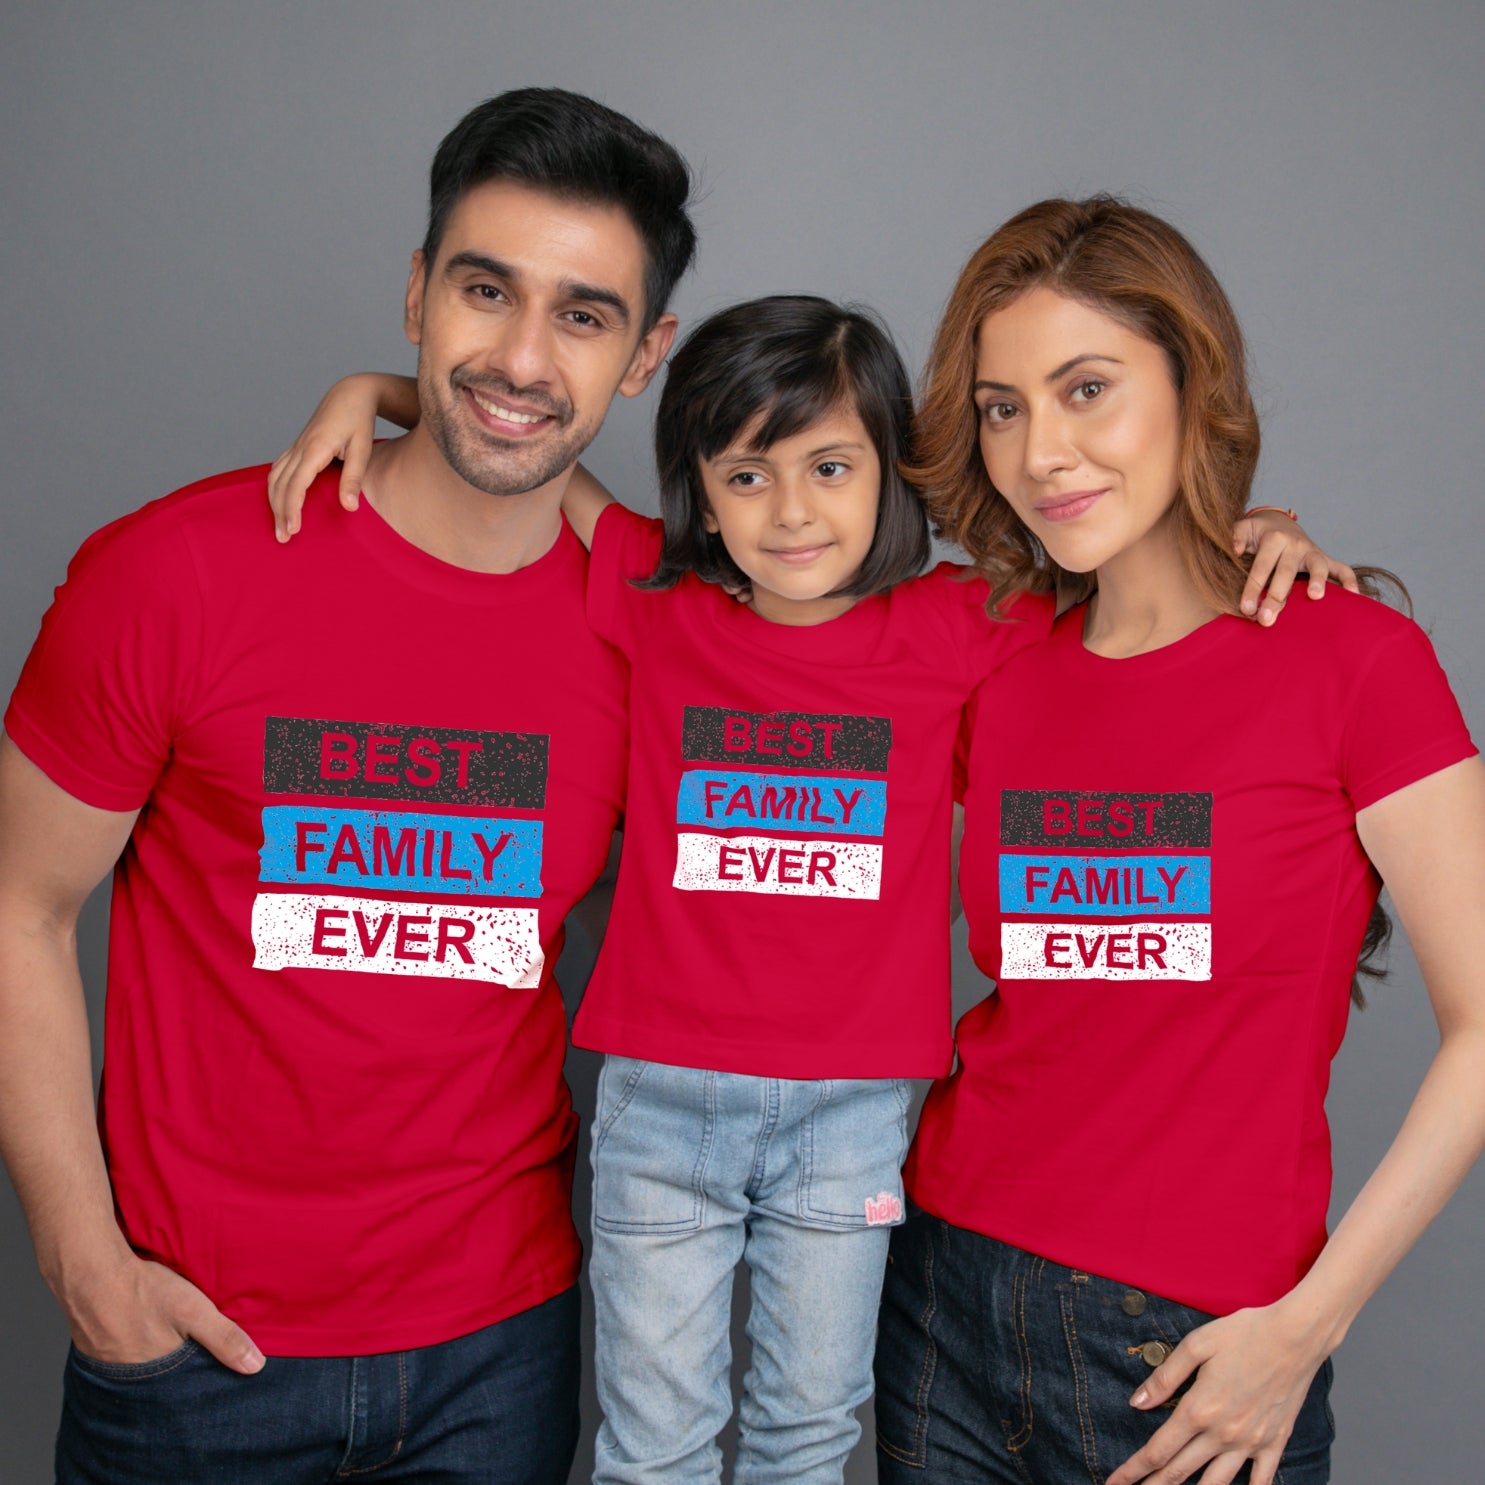 Family t shirt set of 3 Mom Dad Daughter in Red Colour - Best Family Ever Variant